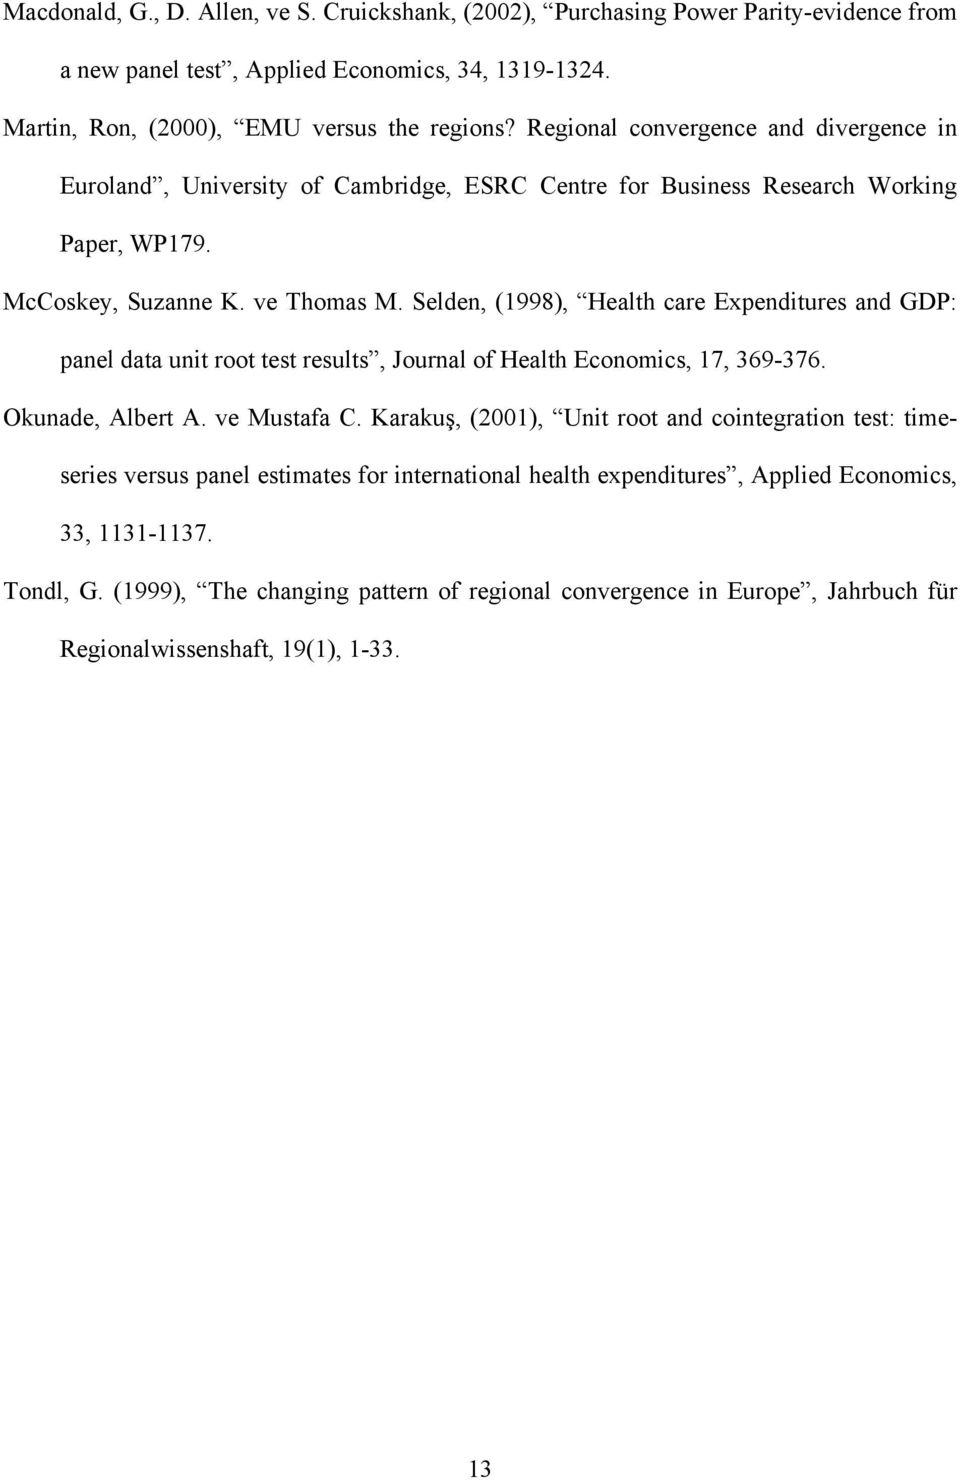 Selden, (1998), Health care Expenditures and GDP: panel data unit root test results, Journal of Health Economics, 17, 369-376. Okunade, Albert A. ve Mustafa C.